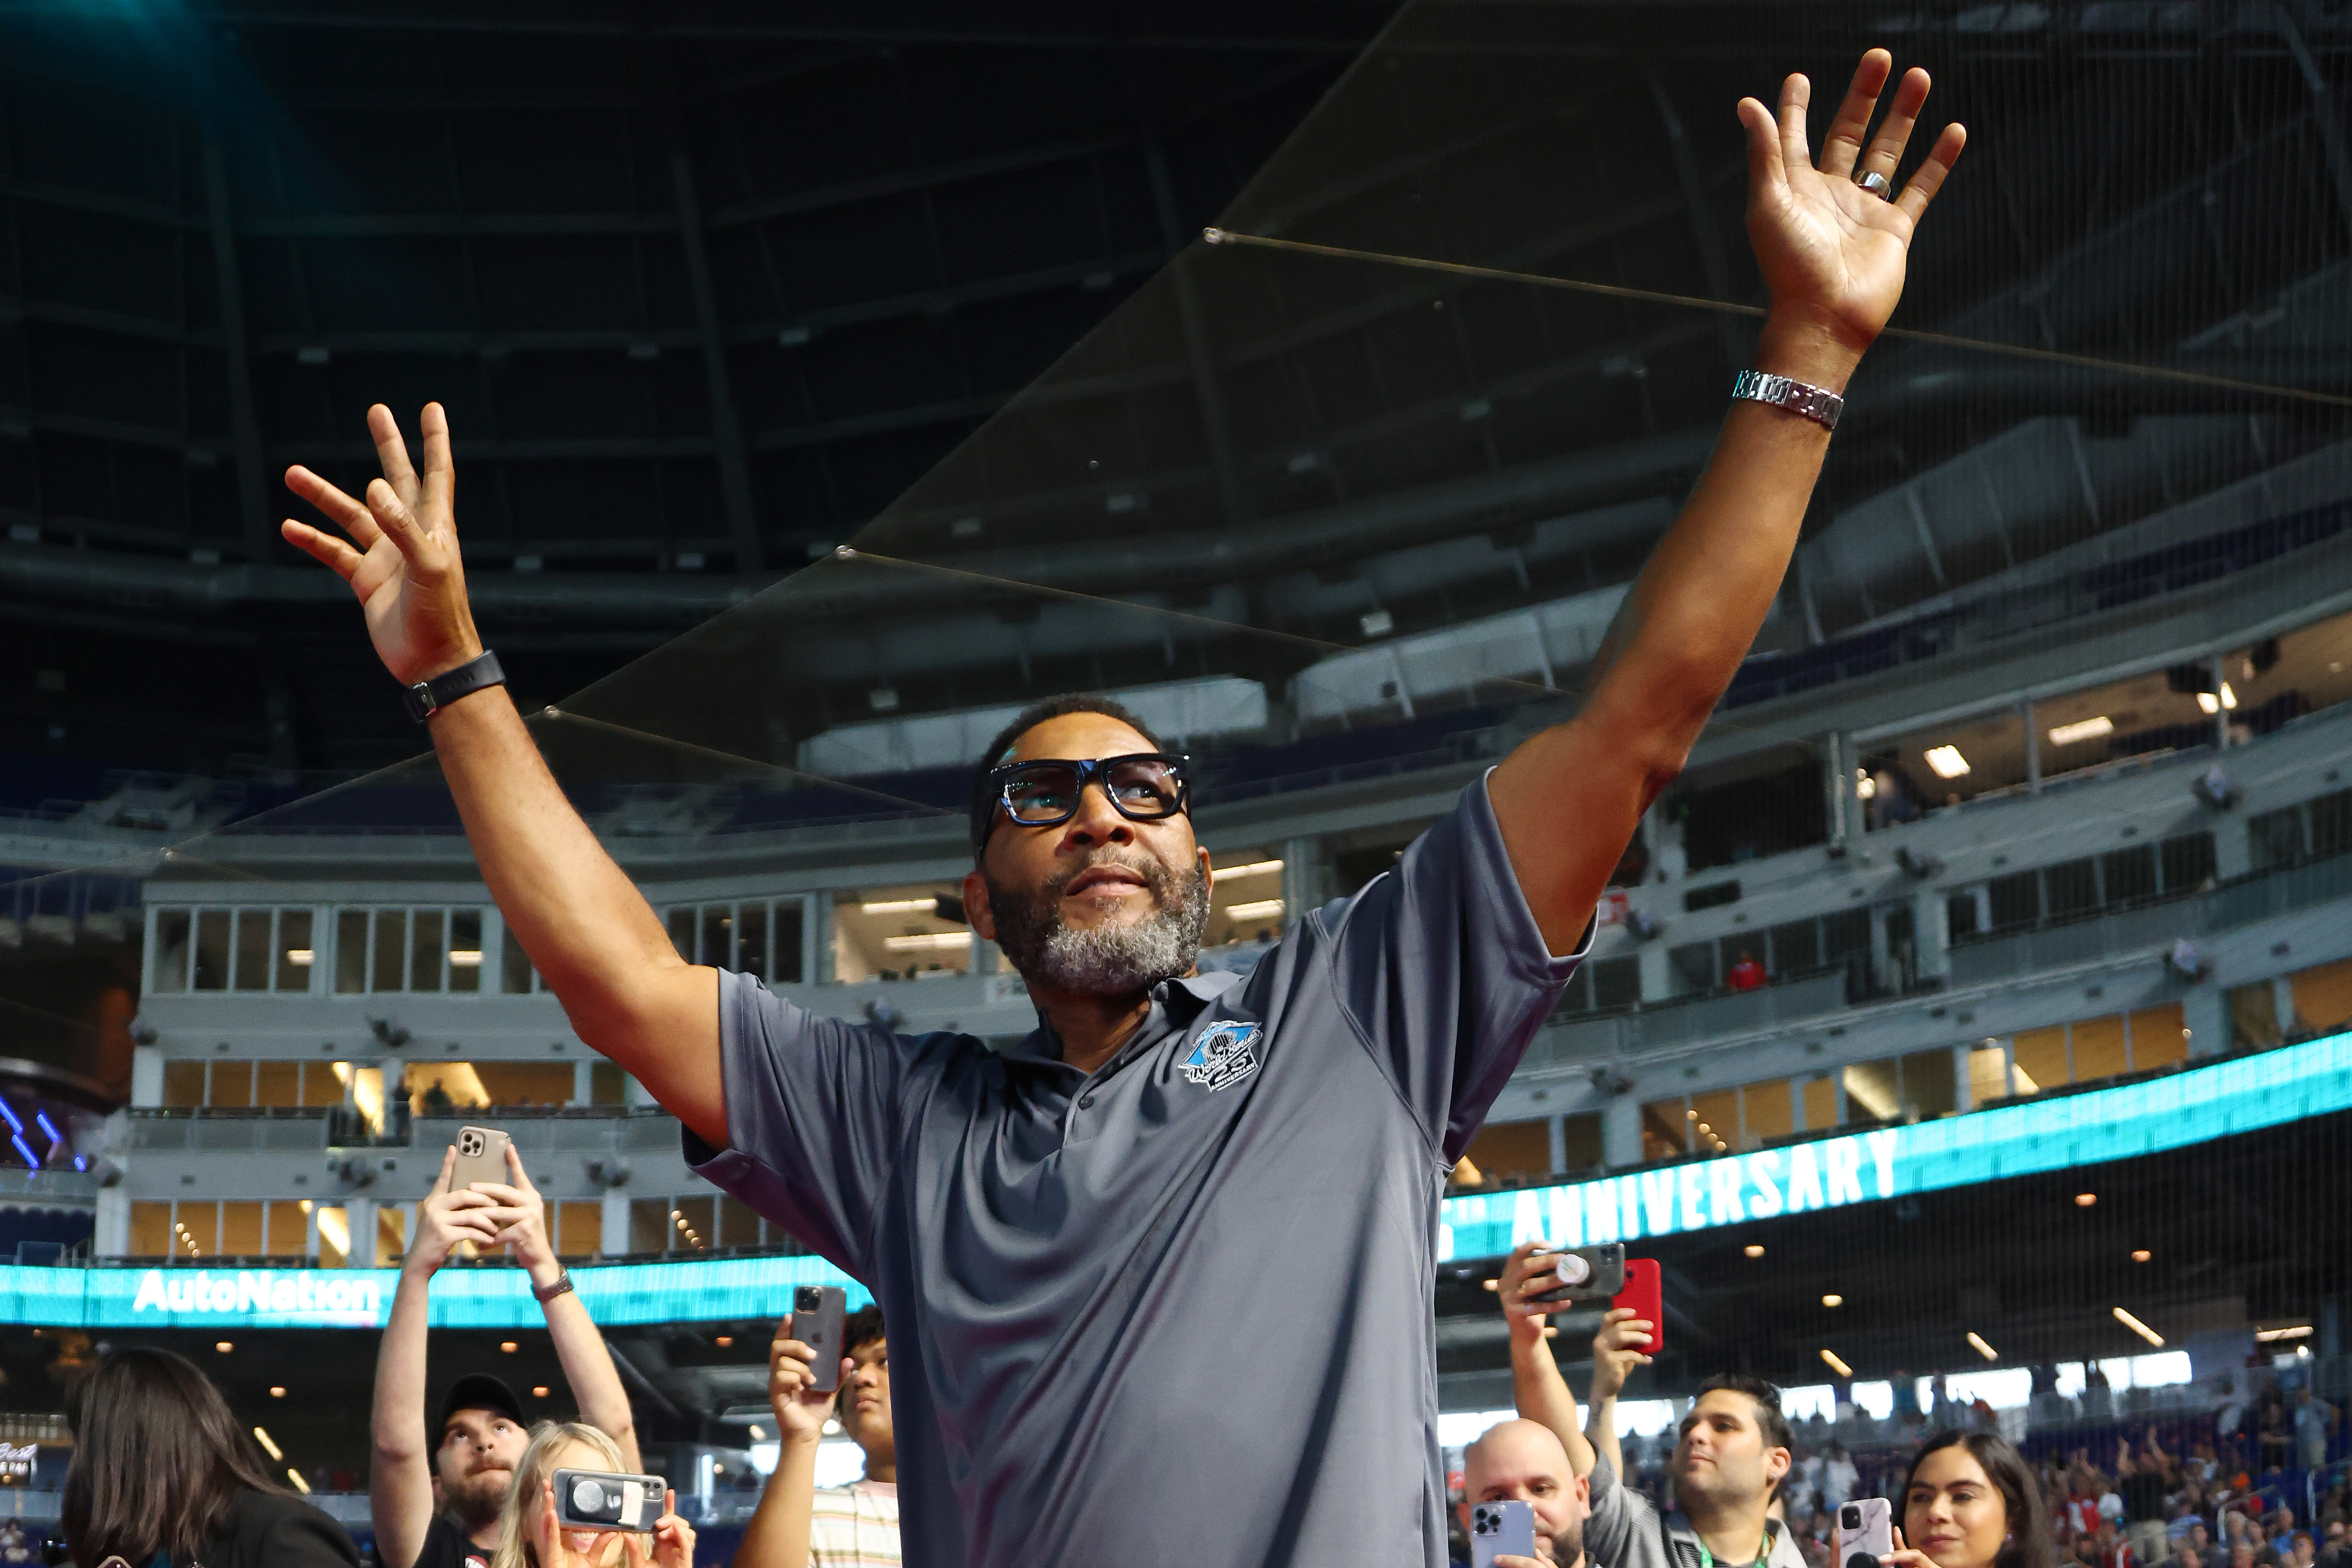 Gary Sheffield waves as he is introduced during a ceremony to honor the 25th Anniversary of the 1997 World Series Champion Florida Marlins prior to the game between the Miami Marlins and the Milwaukee Brewers at loanDepot park on May 14, 2022 in Miami, Florida.